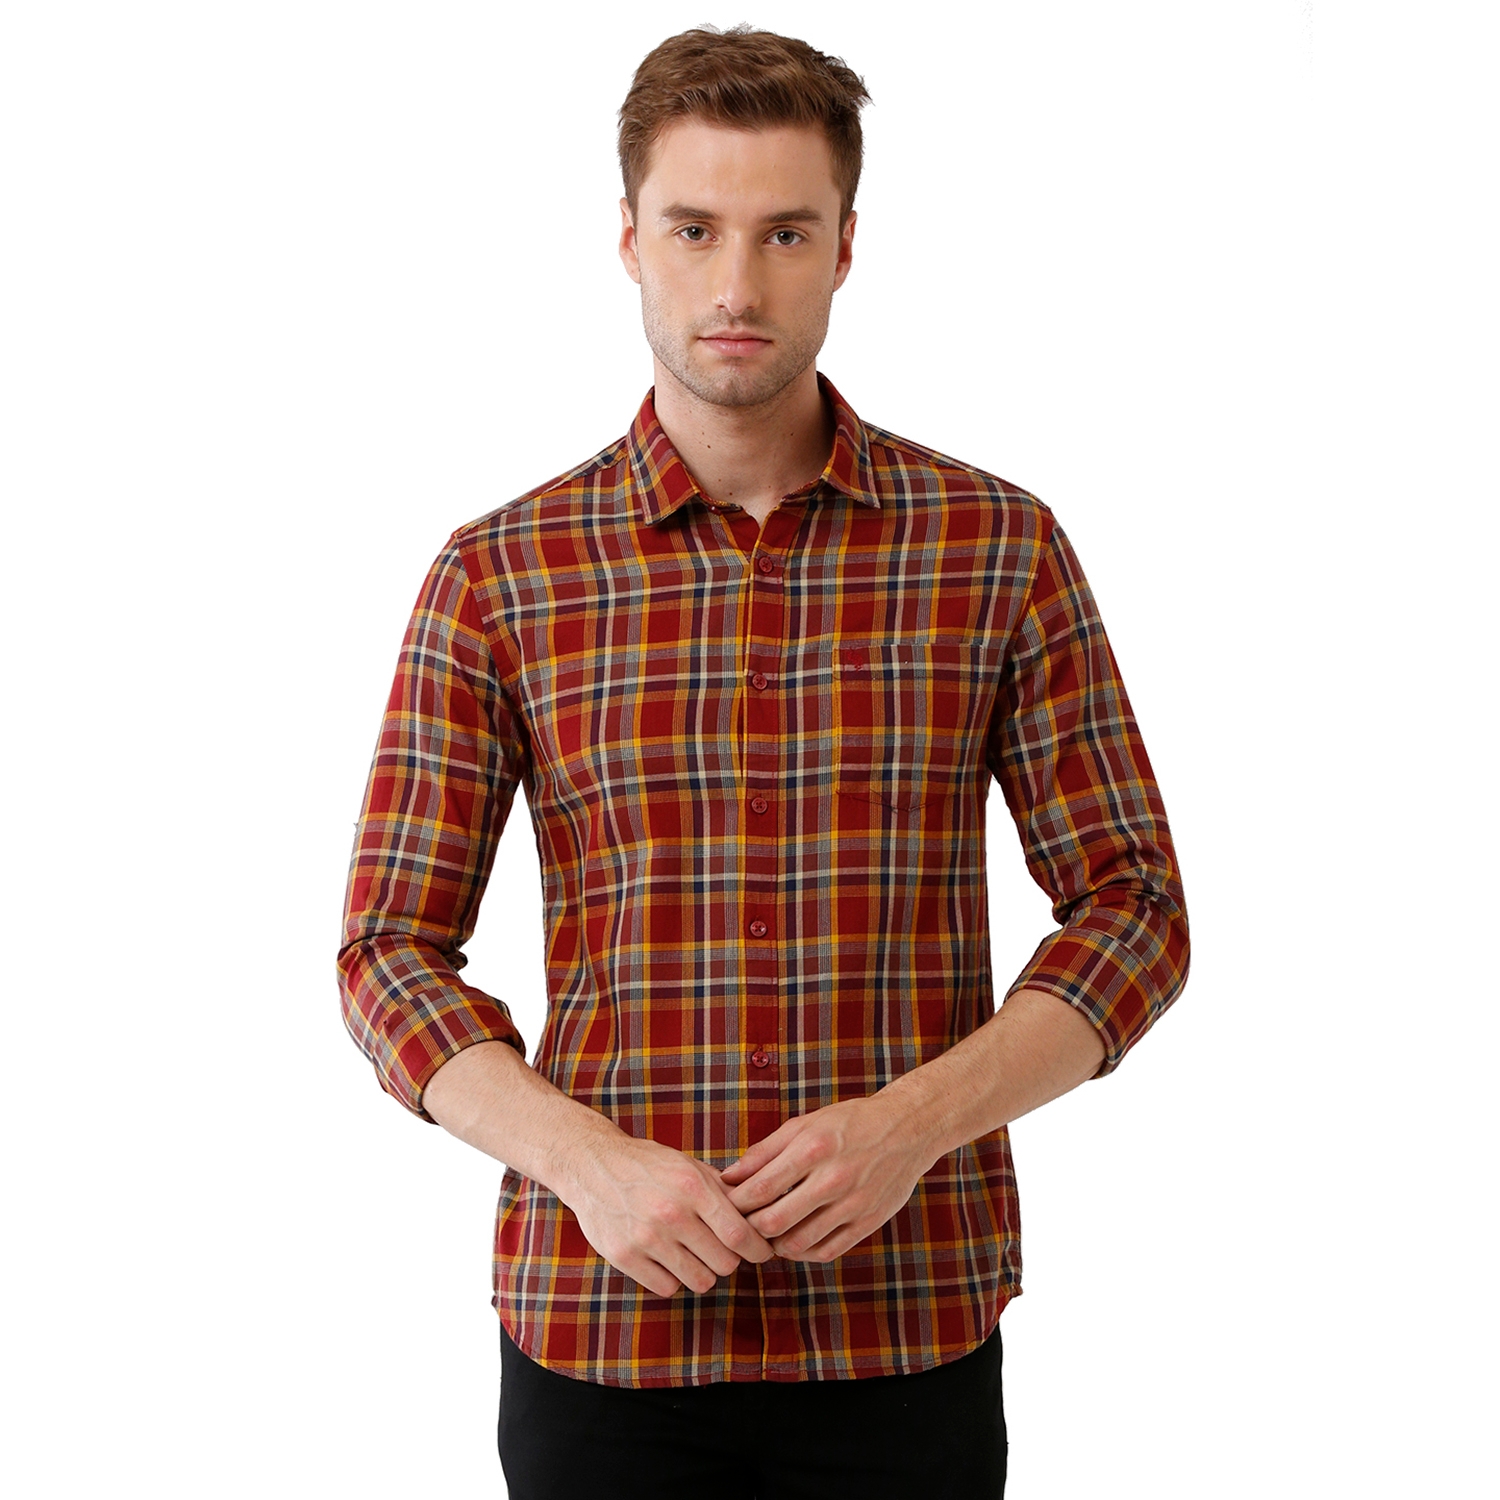 Swiss club | Swiss Club Mens 100% Cotton Checked Full Sleeve Slim Fit Polo Neck Multicolor Woven Shirt (S-SC-117 A-FS-CHK-BSL)